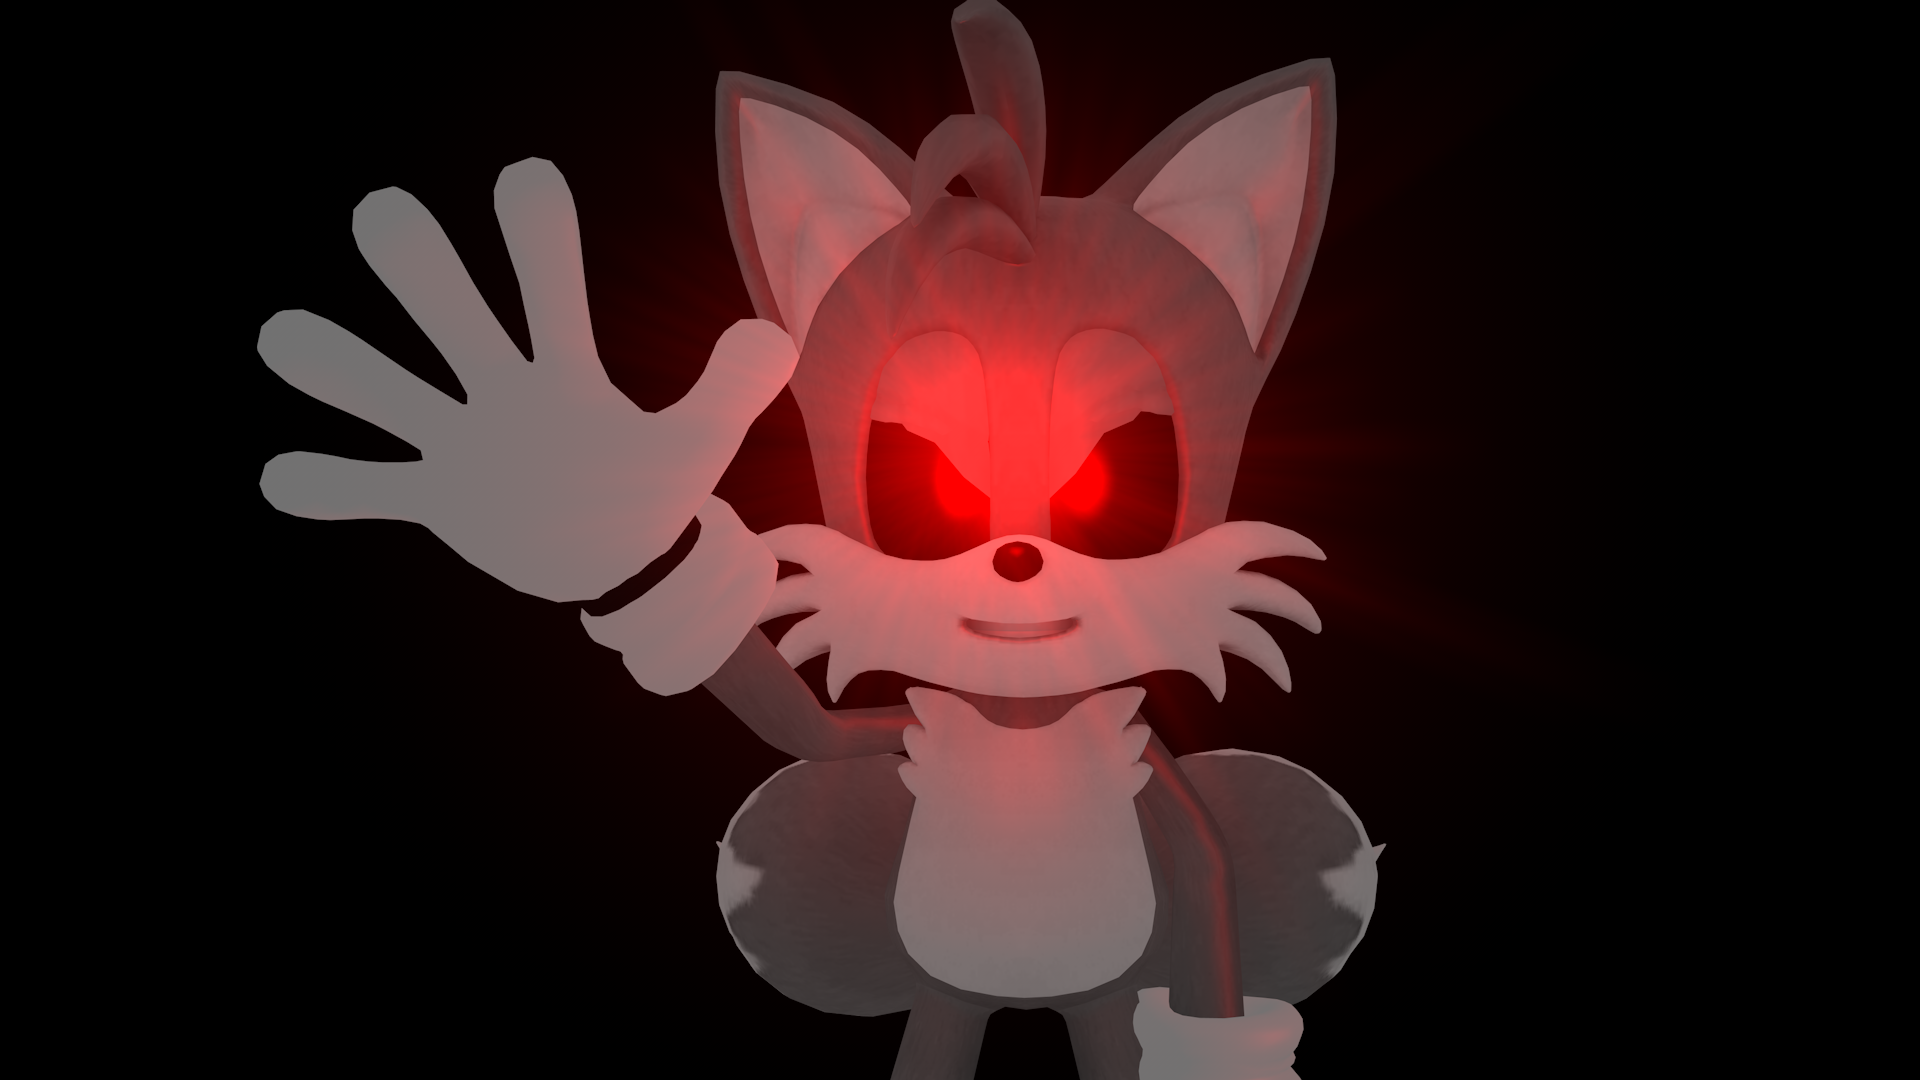 A Simple Tails.exe draw by MrDrEZQ on DeviantArt